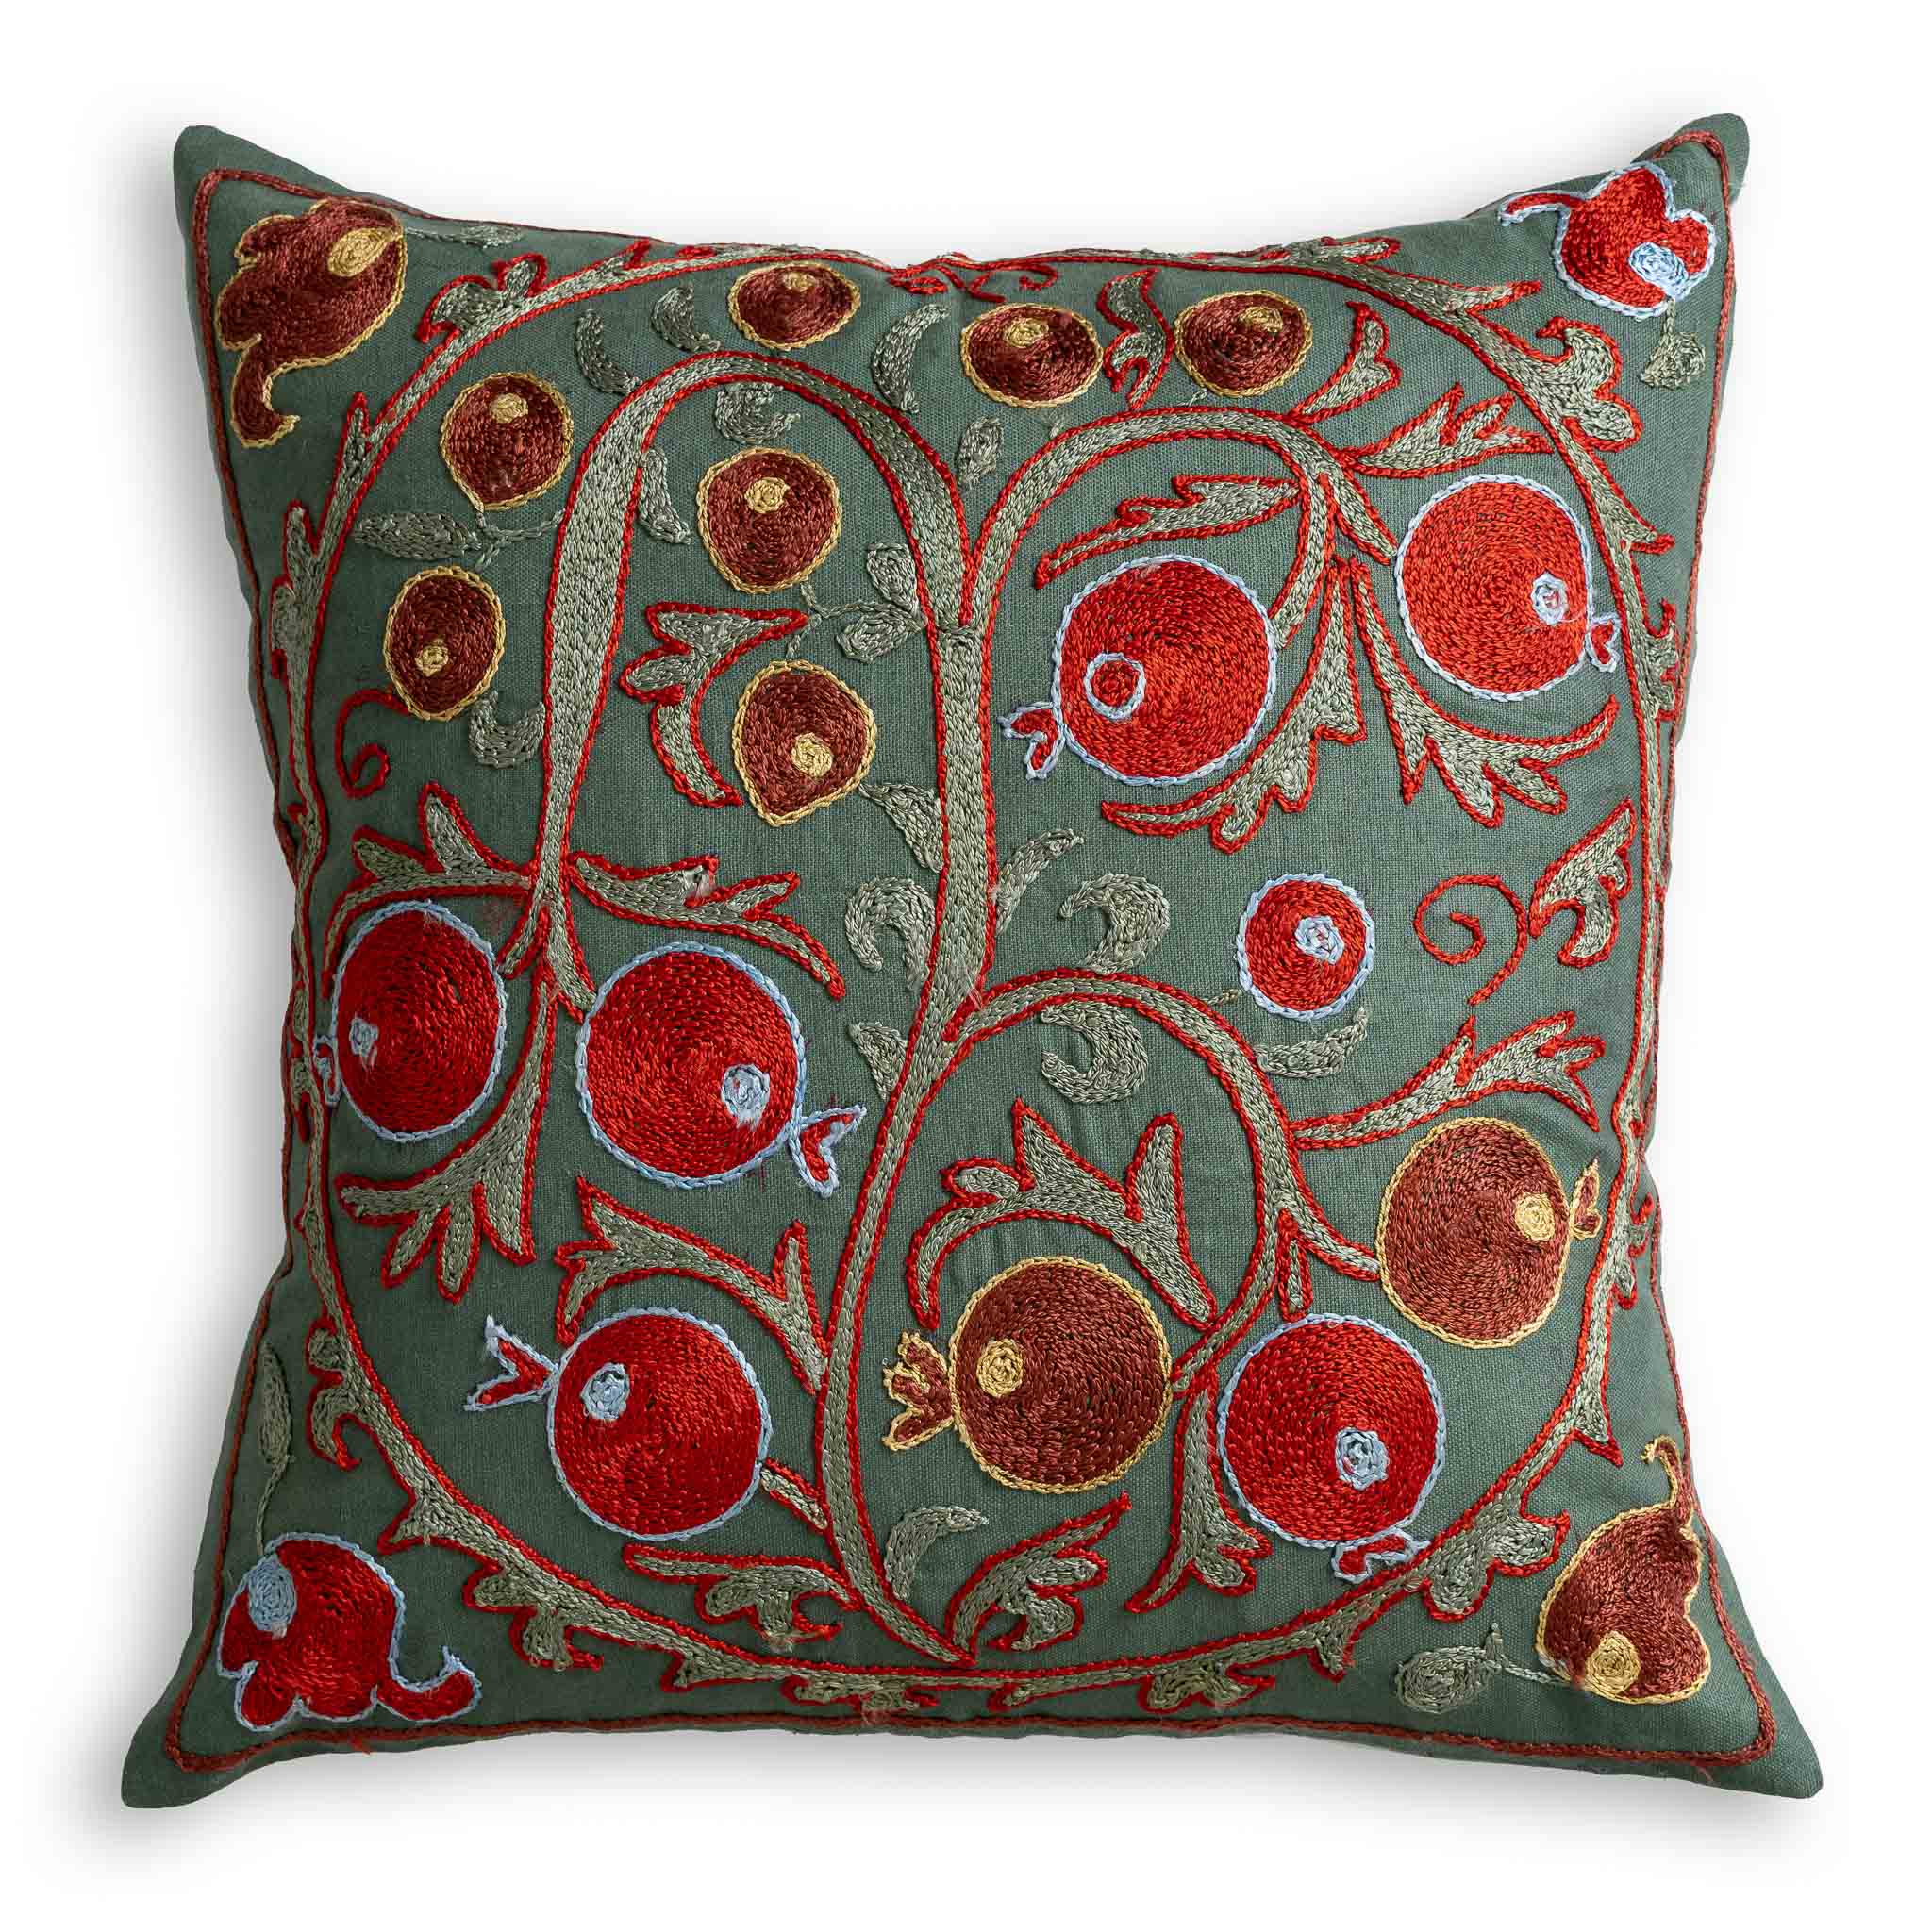 Suzani Silk Embroidered Stylised Floral Patterned Scatter Cushion on dark green background with light green leaves and red and burgundy coloured fruit